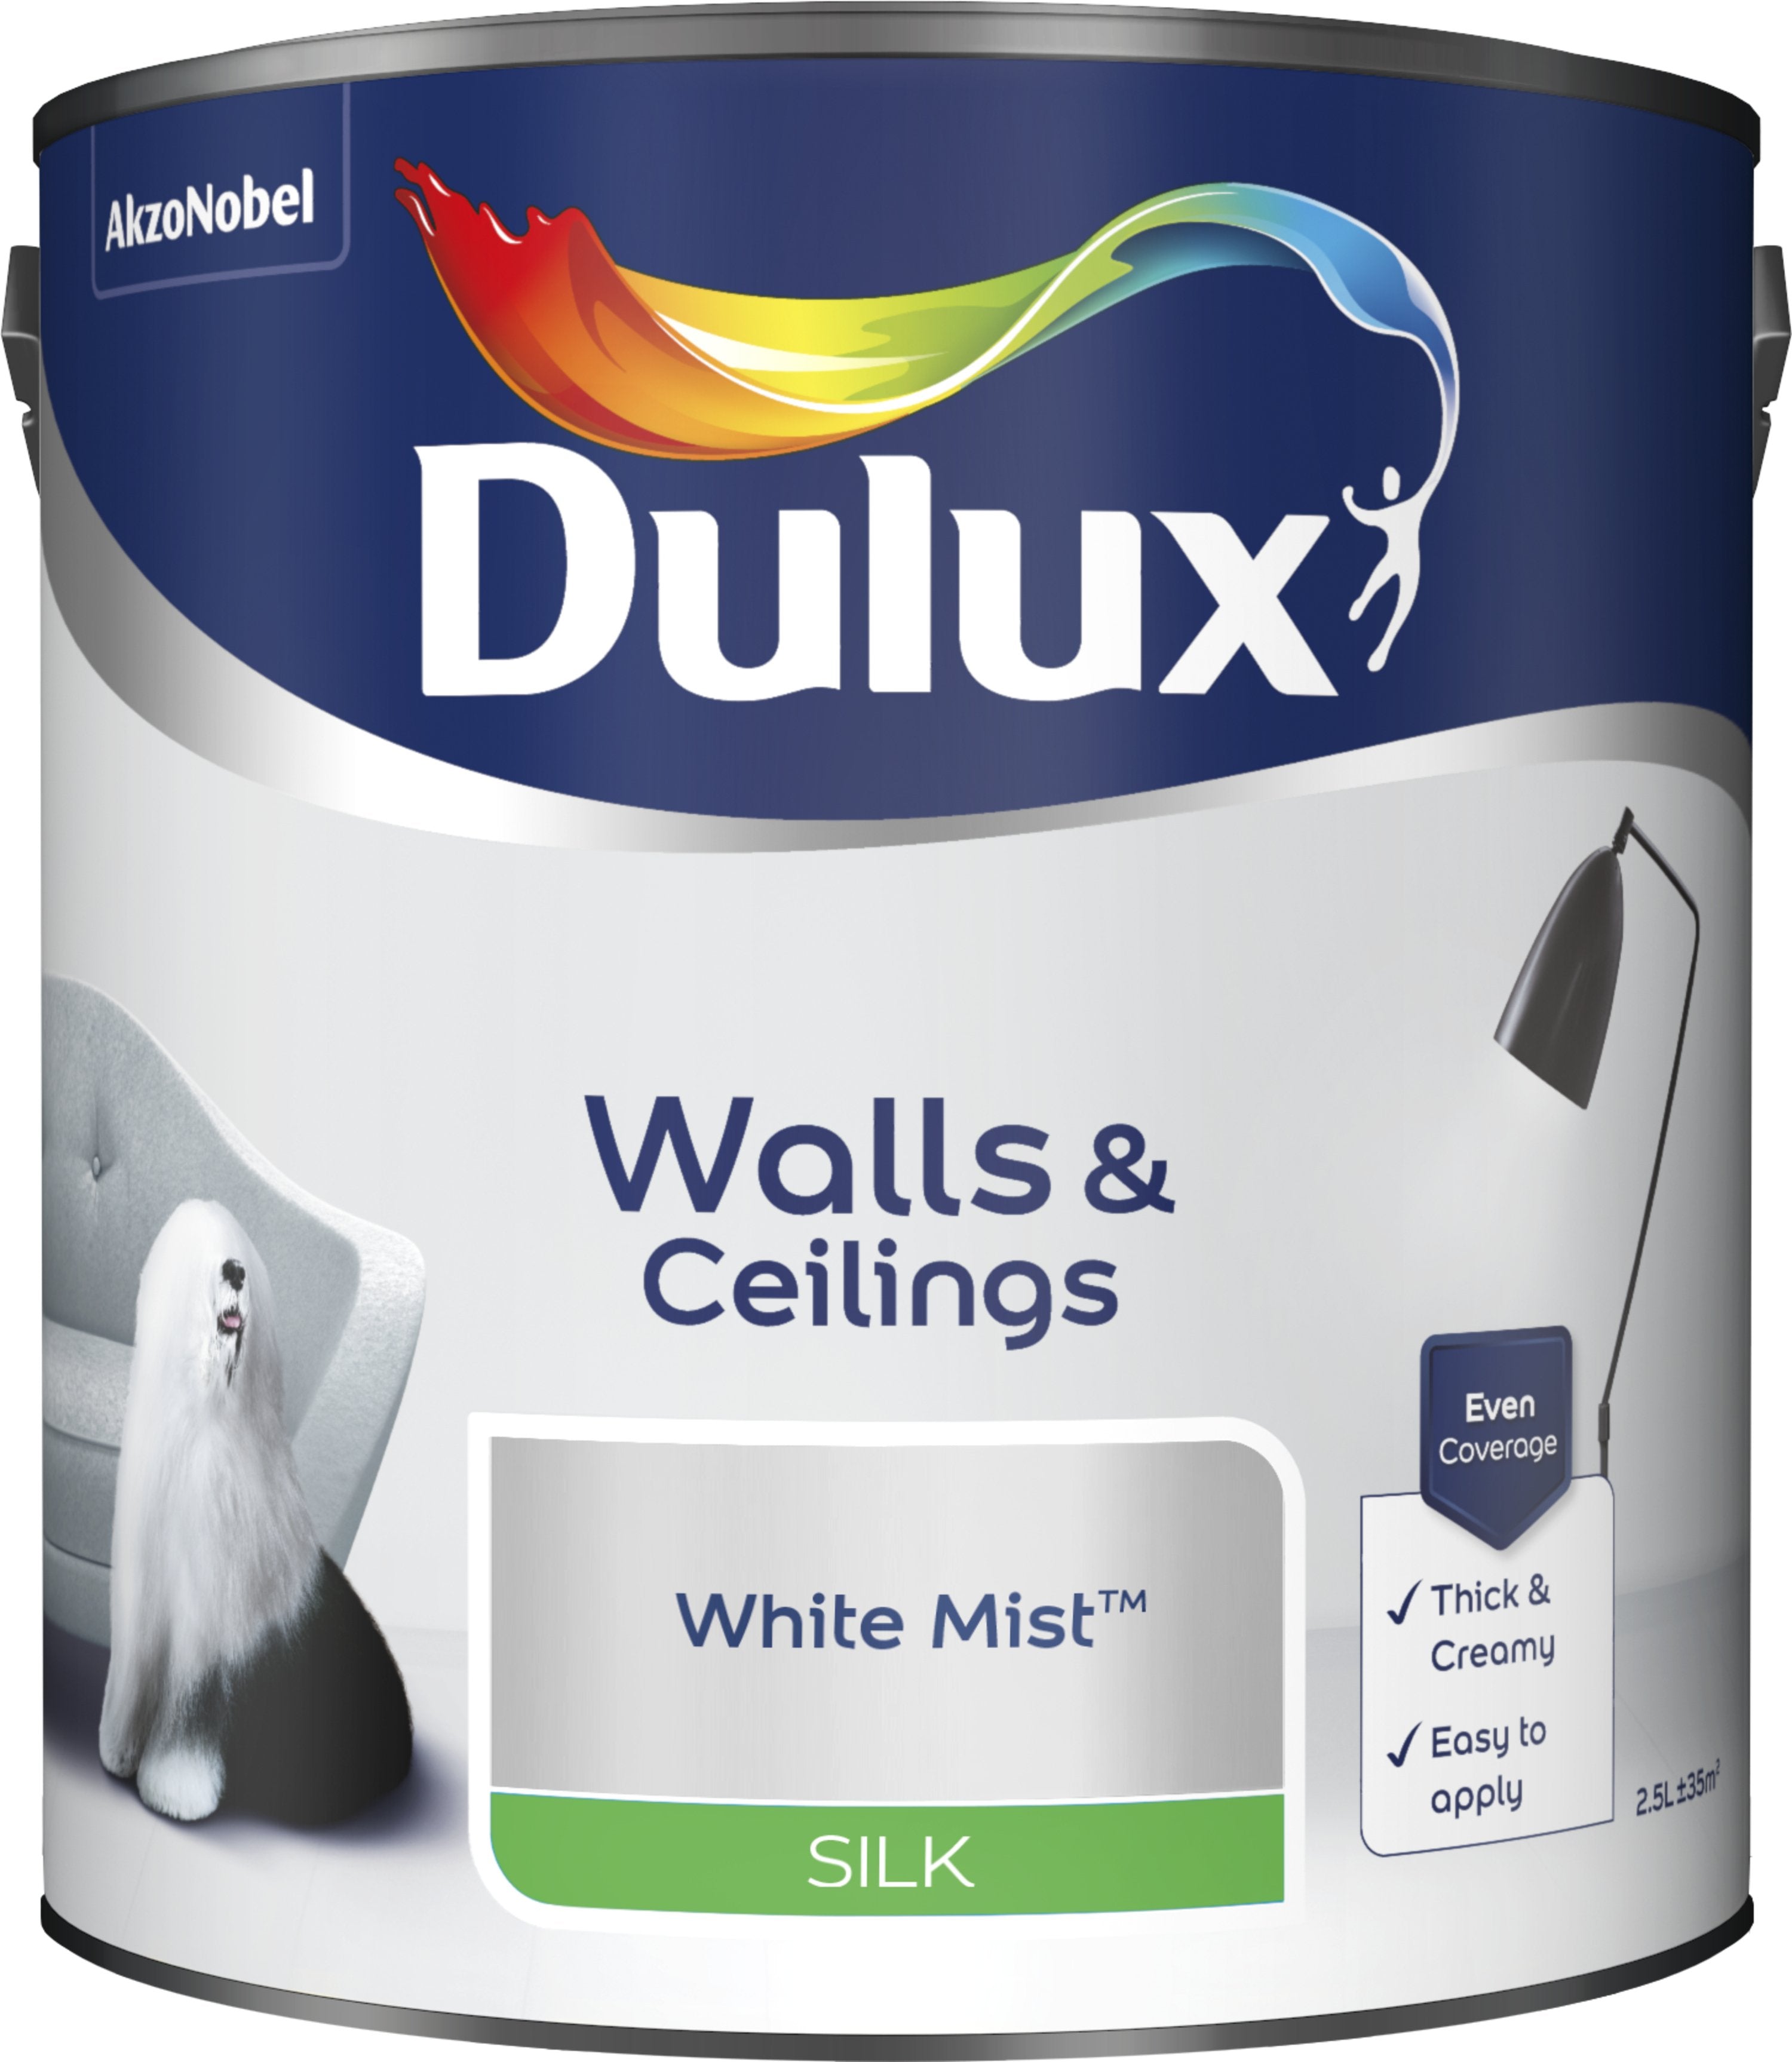 Dulux Silk Emulsion Paint For Walls And Ceilings - White Mist 2.5L Garden & Diy Home Improvements